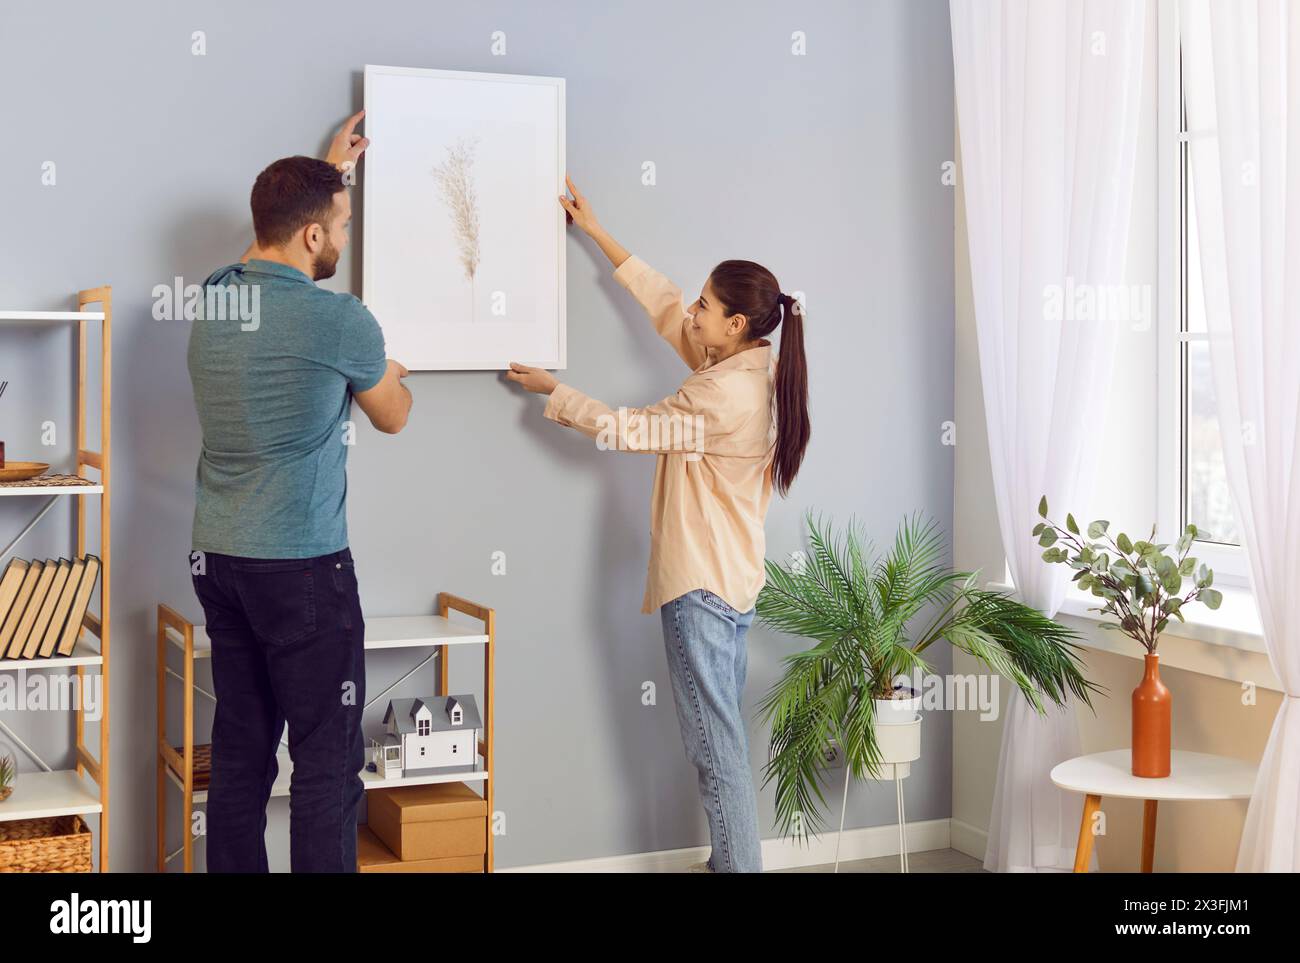 Happy Family Couple Decorating Home And Hanging Picture On Wall Together Stock Photo